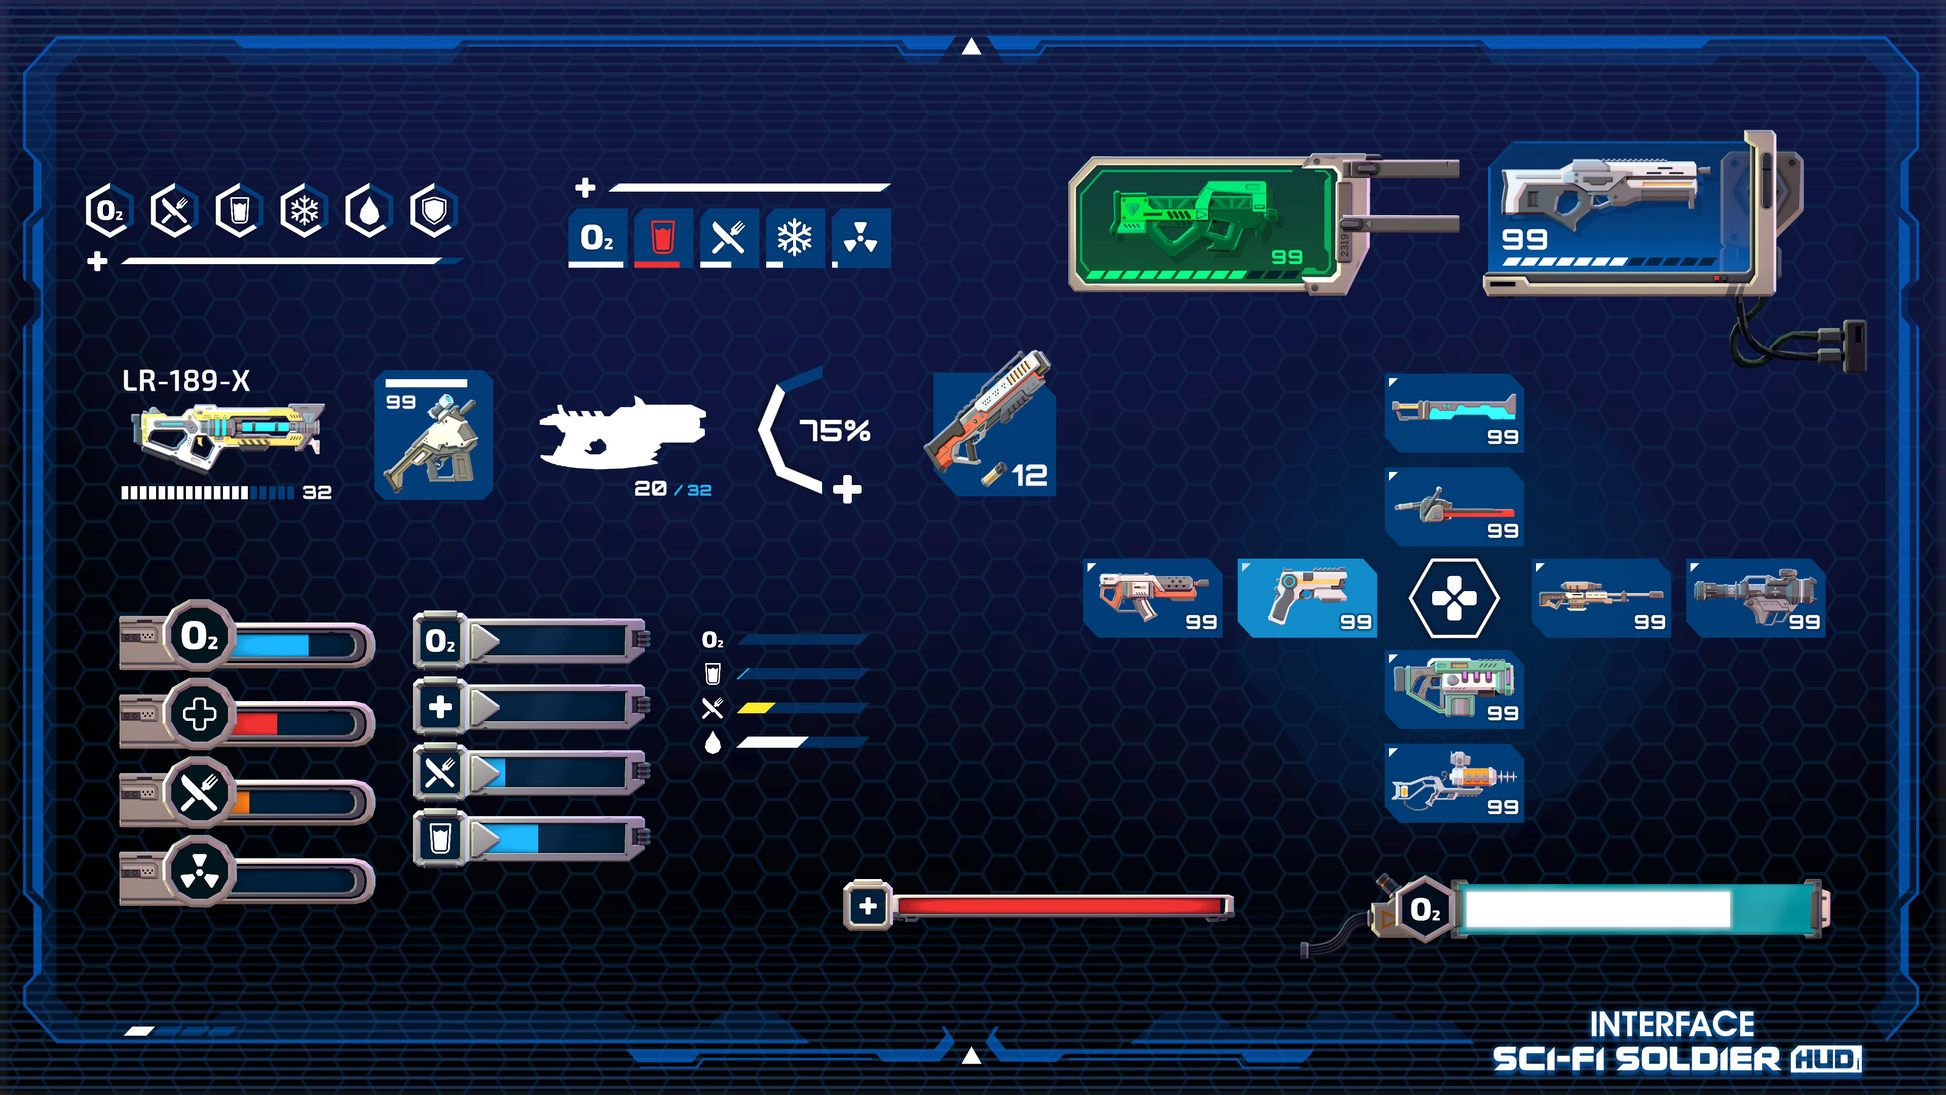 Weapon and equipment UI elements from the INTERFACE Sci-Fi Soldier HUD 3D game asset pack